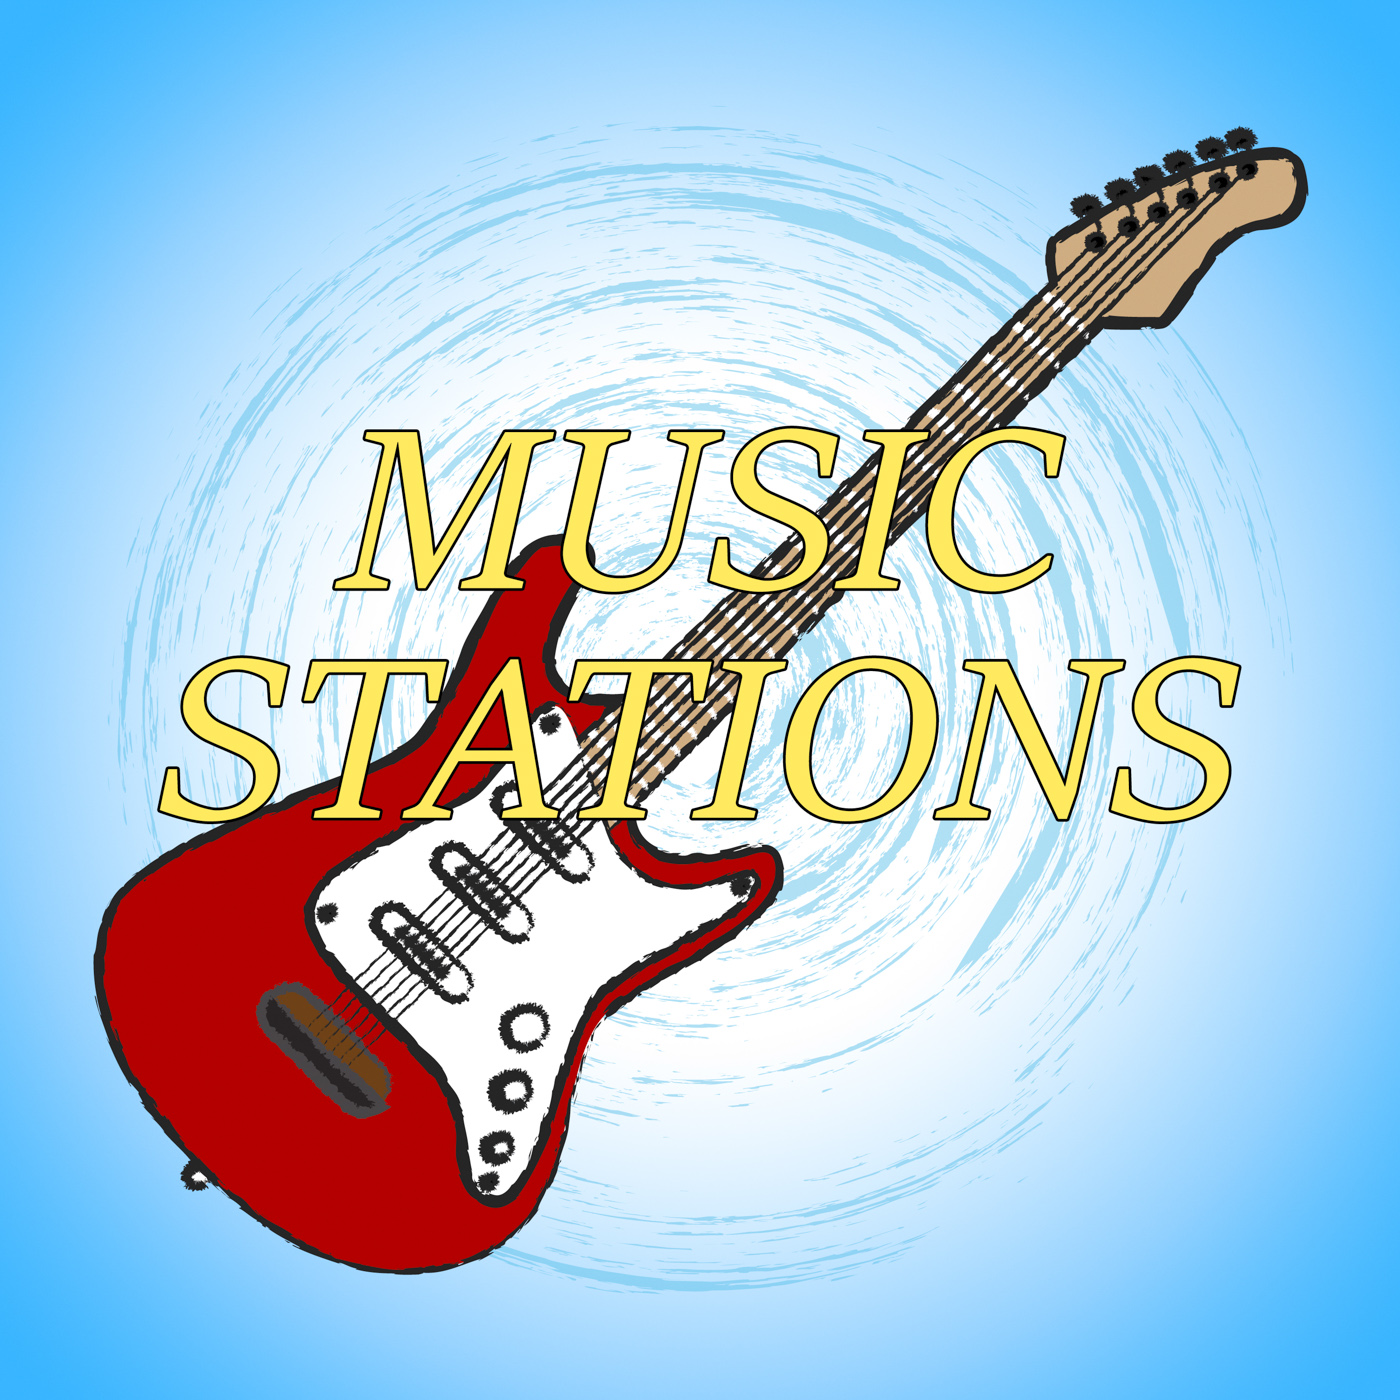 Music stations means sound track and broadcast photo